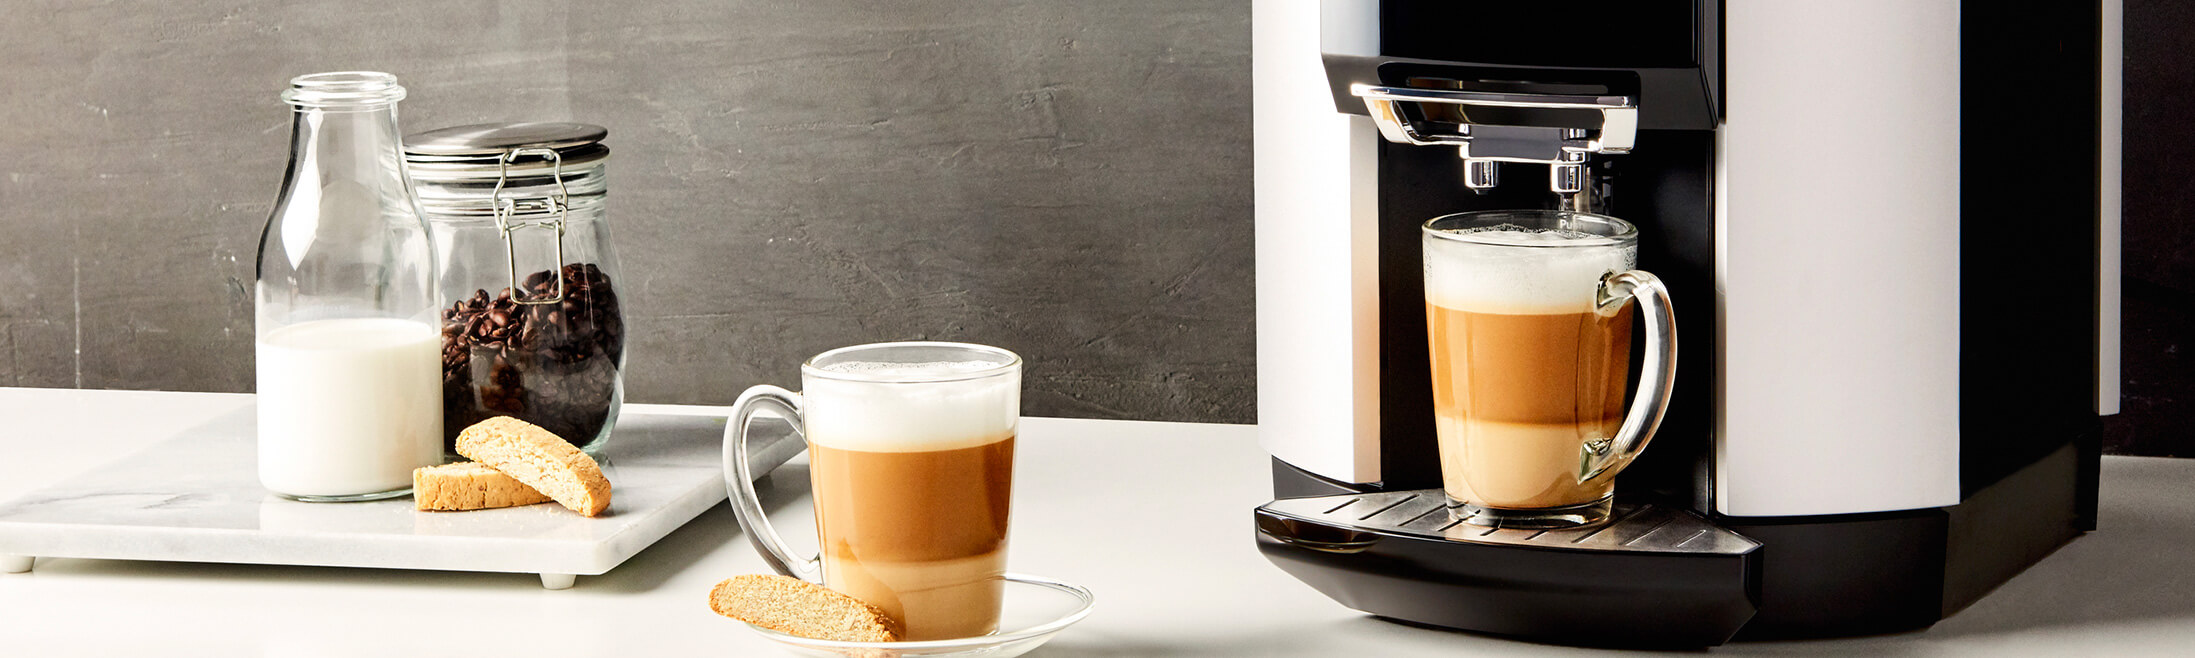 User manual and frequently asked questions Dolce Gusto Krups